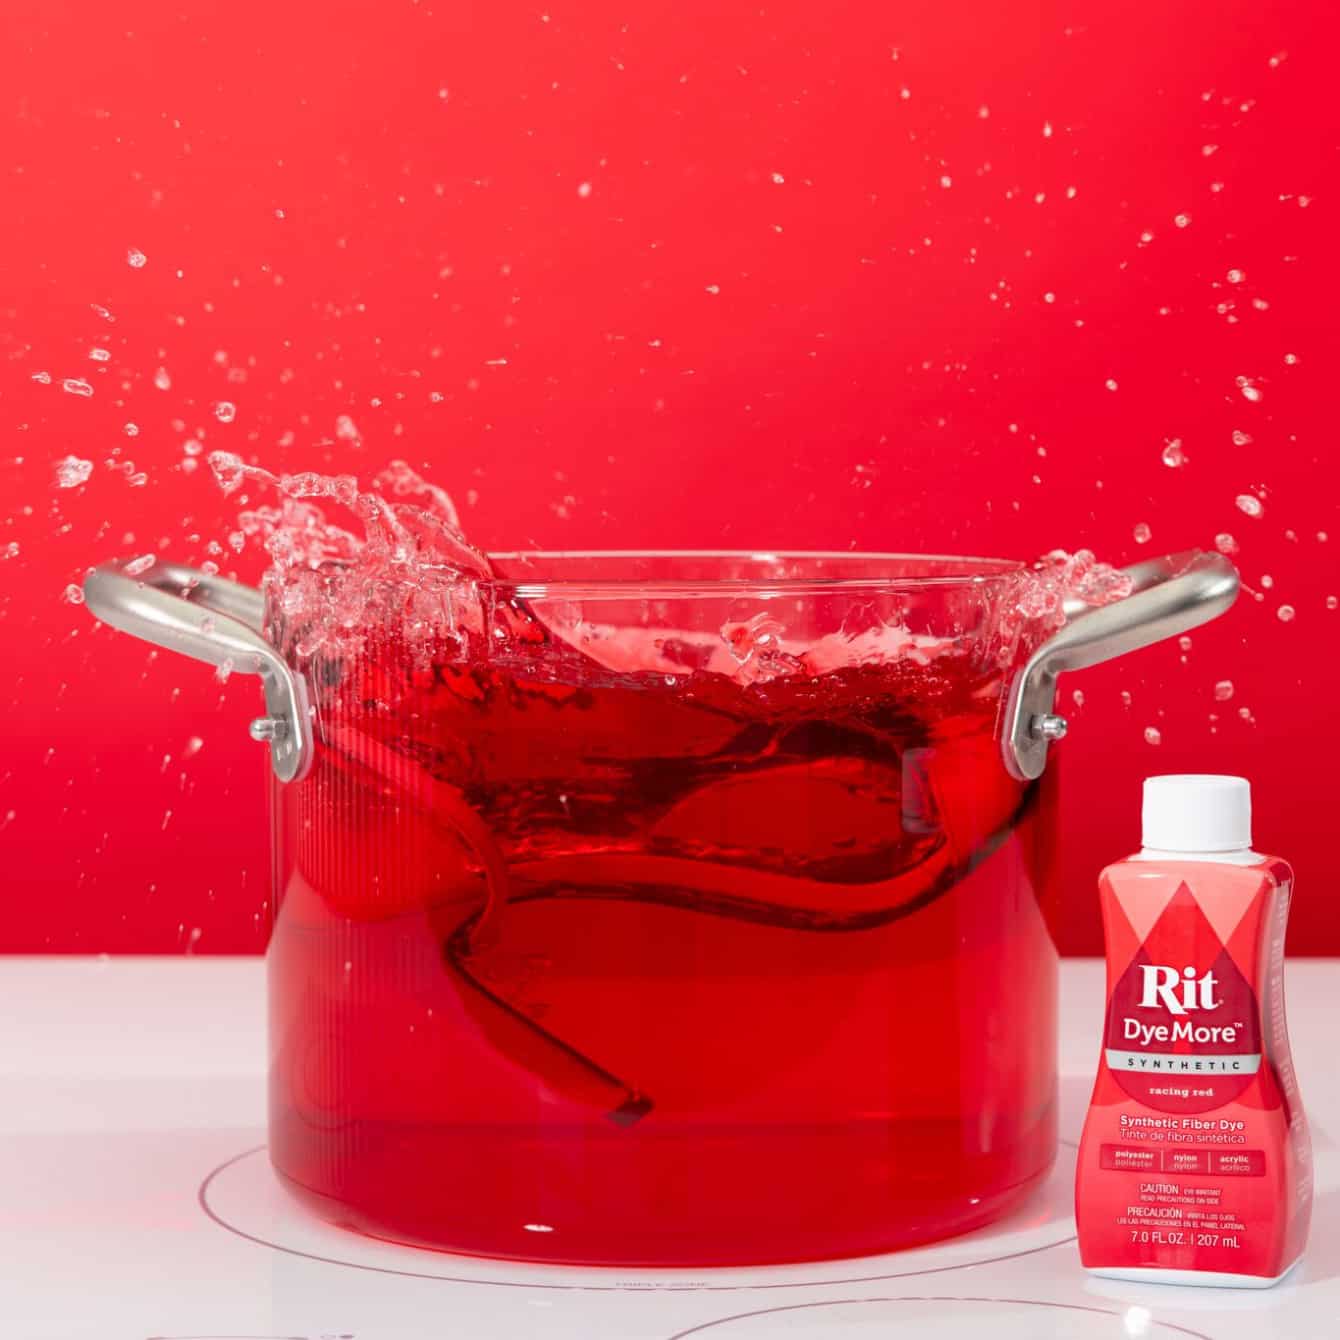 Rit Racing Red DyeMore Dye for Synthetics